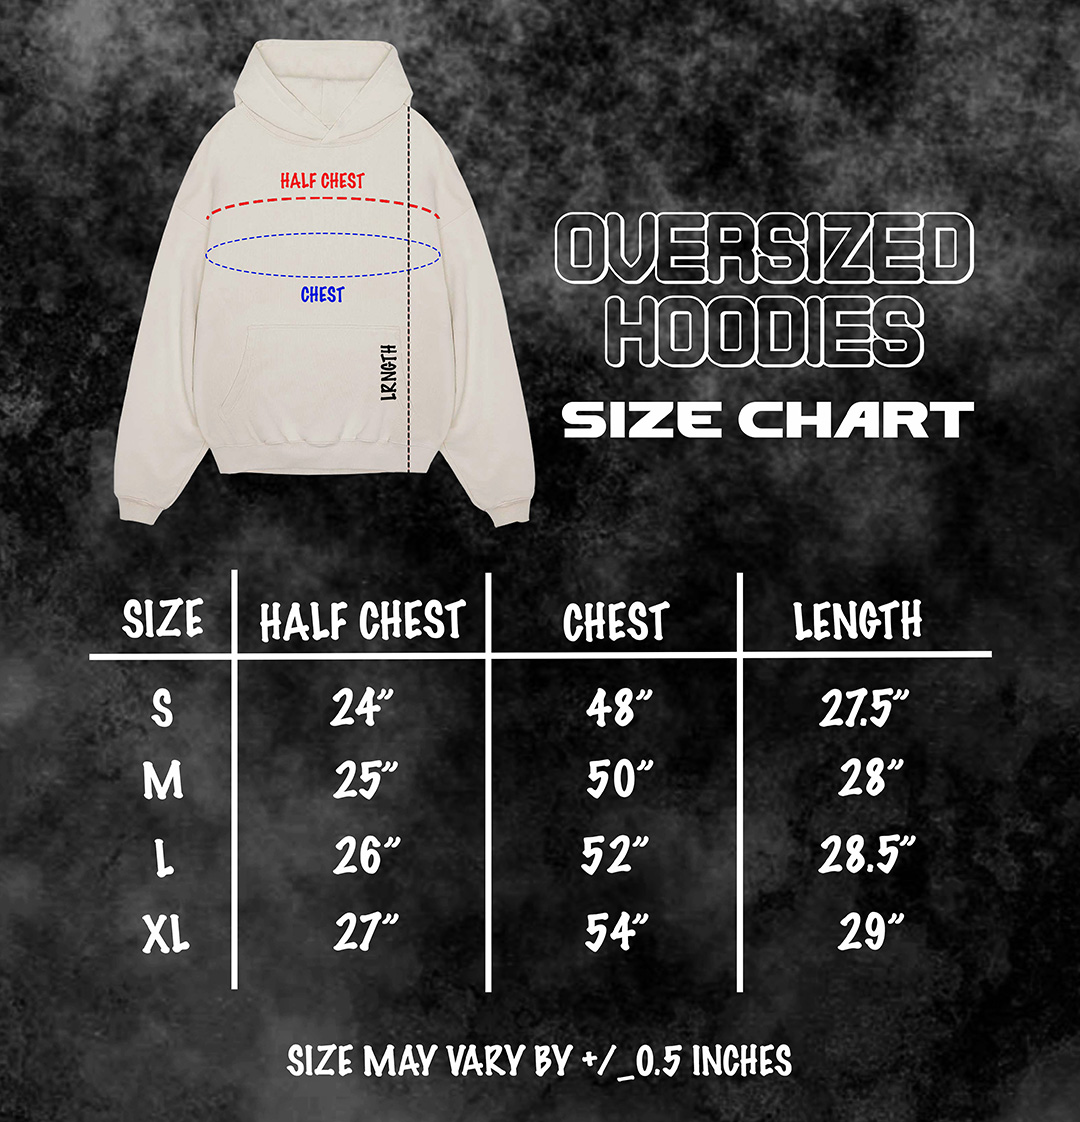 zakers-oversized-hoodies-mocup-small-size-2.jpg